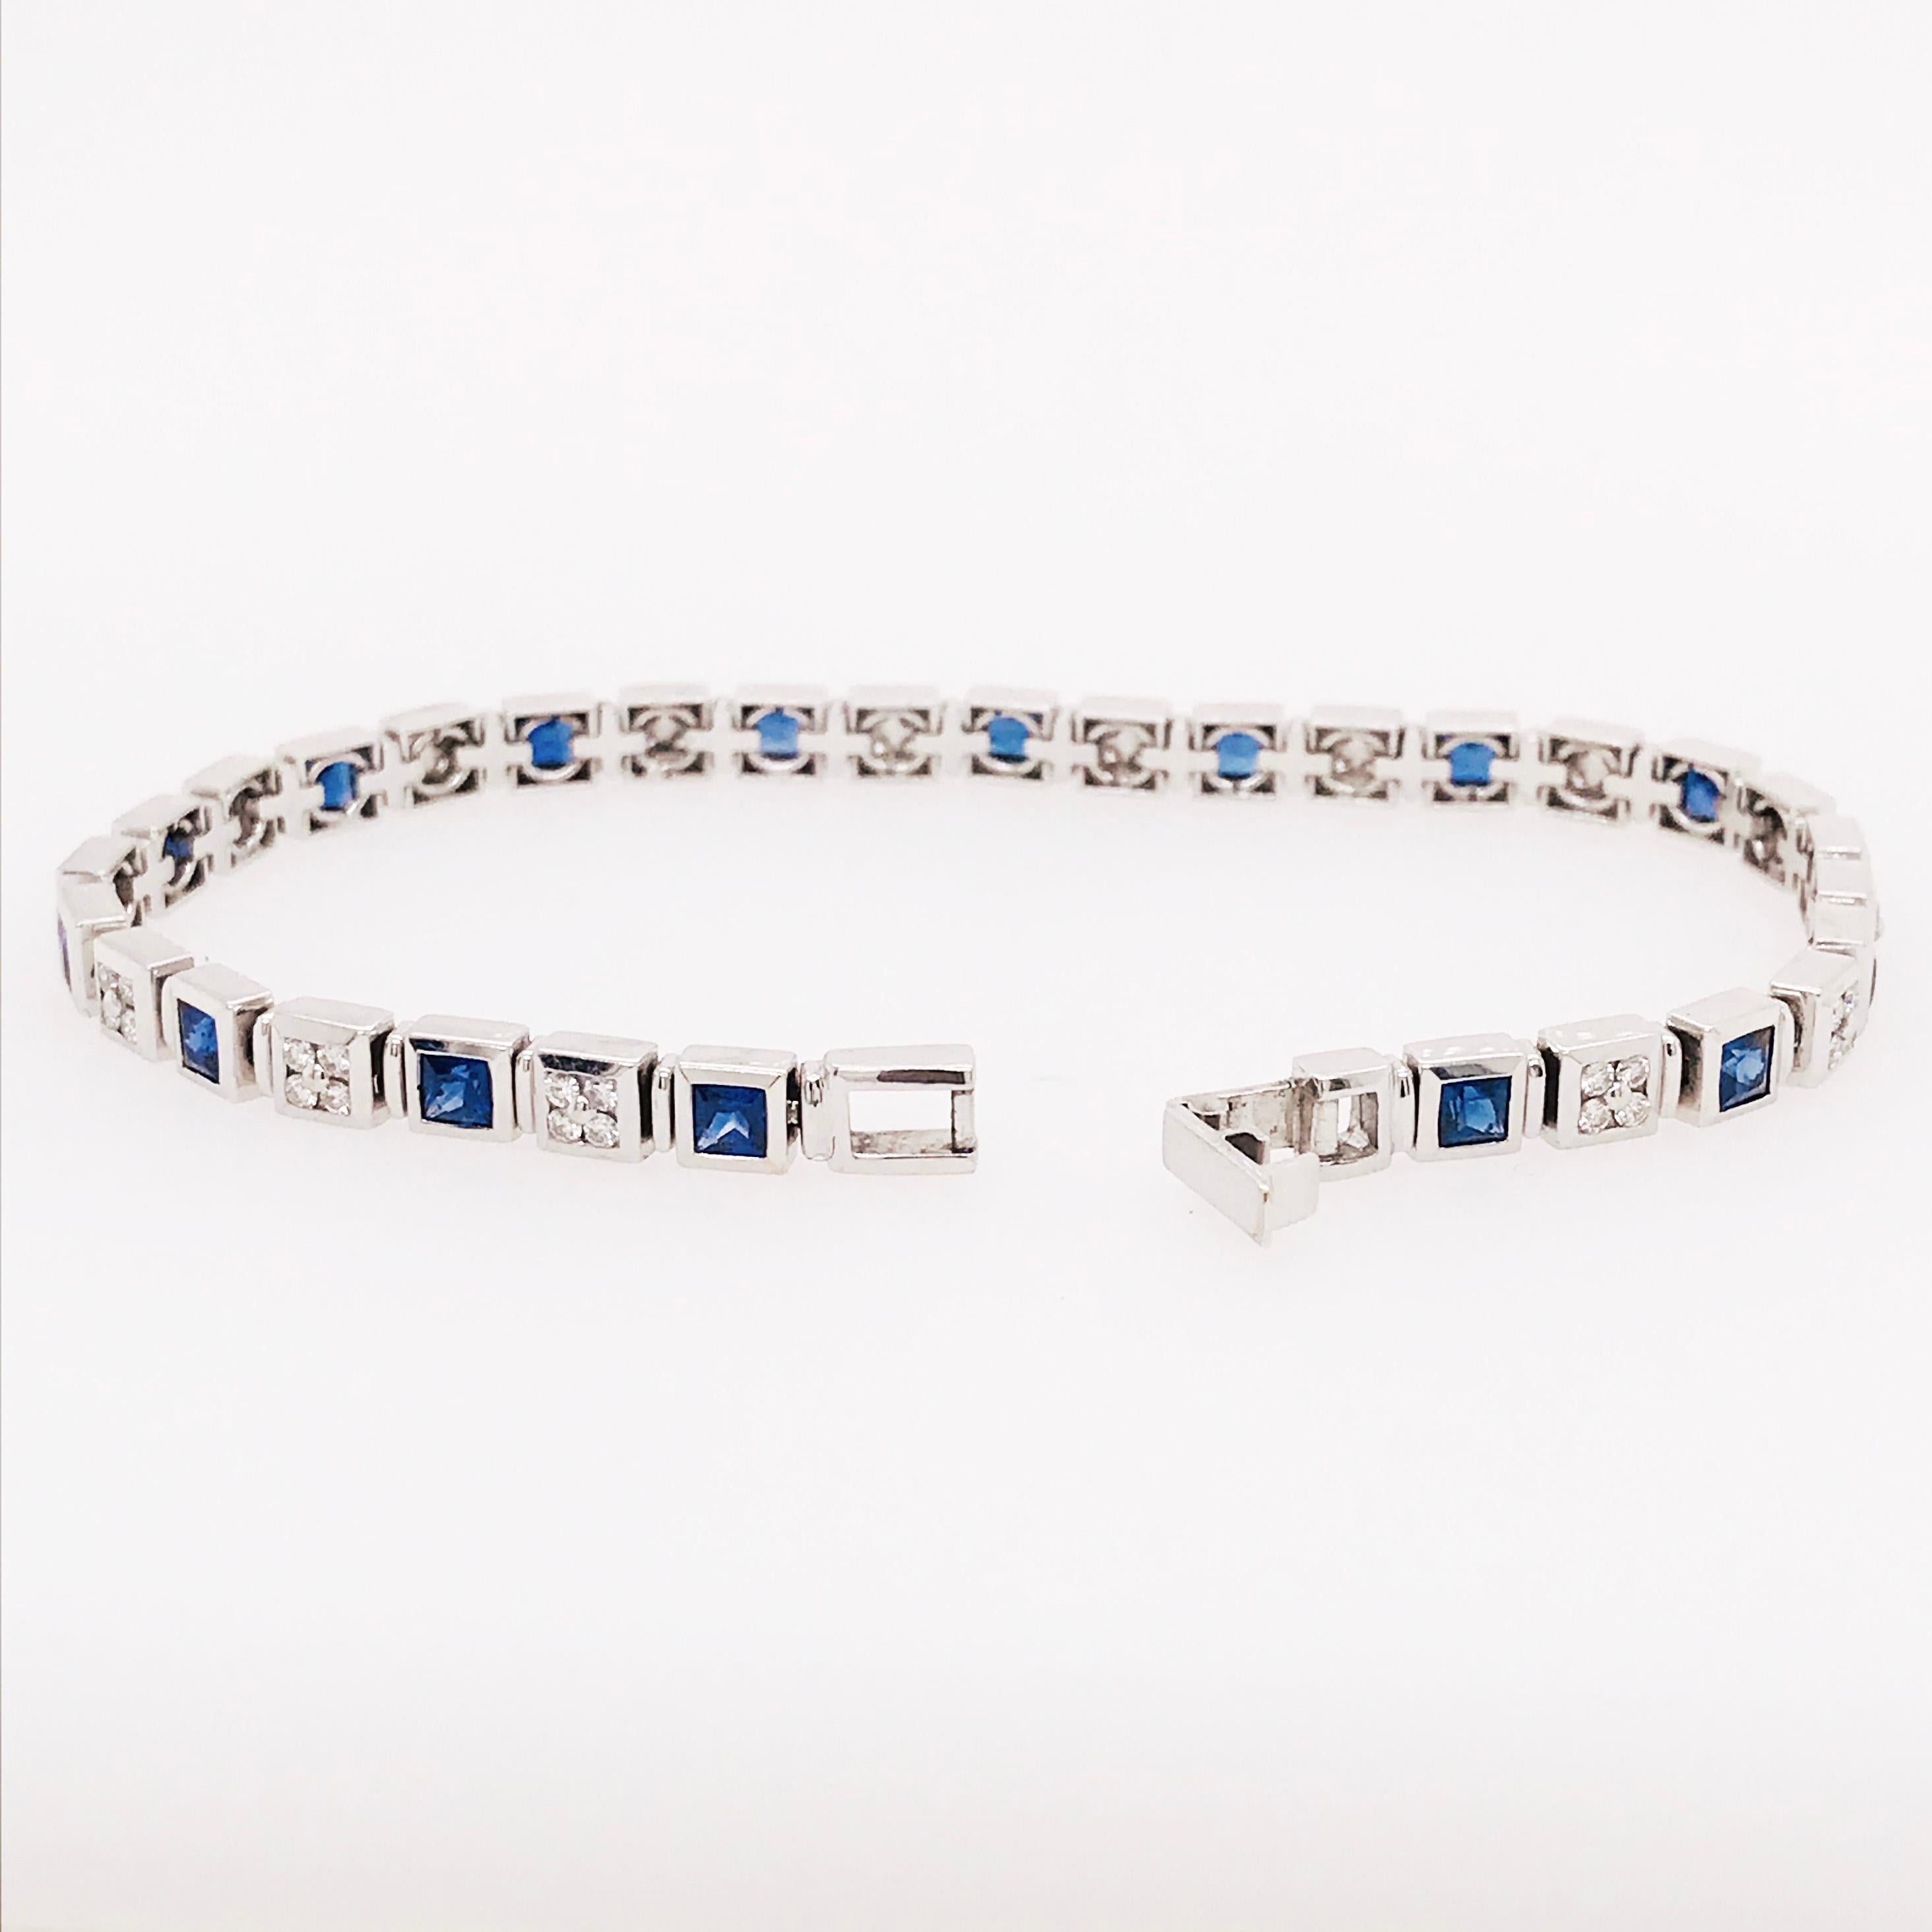 Princess cut genuine blue sapphire and natural white diamond tennis bracelet. With an alternating pattern of genuine blue sapphire gemstones and natural round brilliant diamonds. Each link has been hand made and matched perfectly. The round